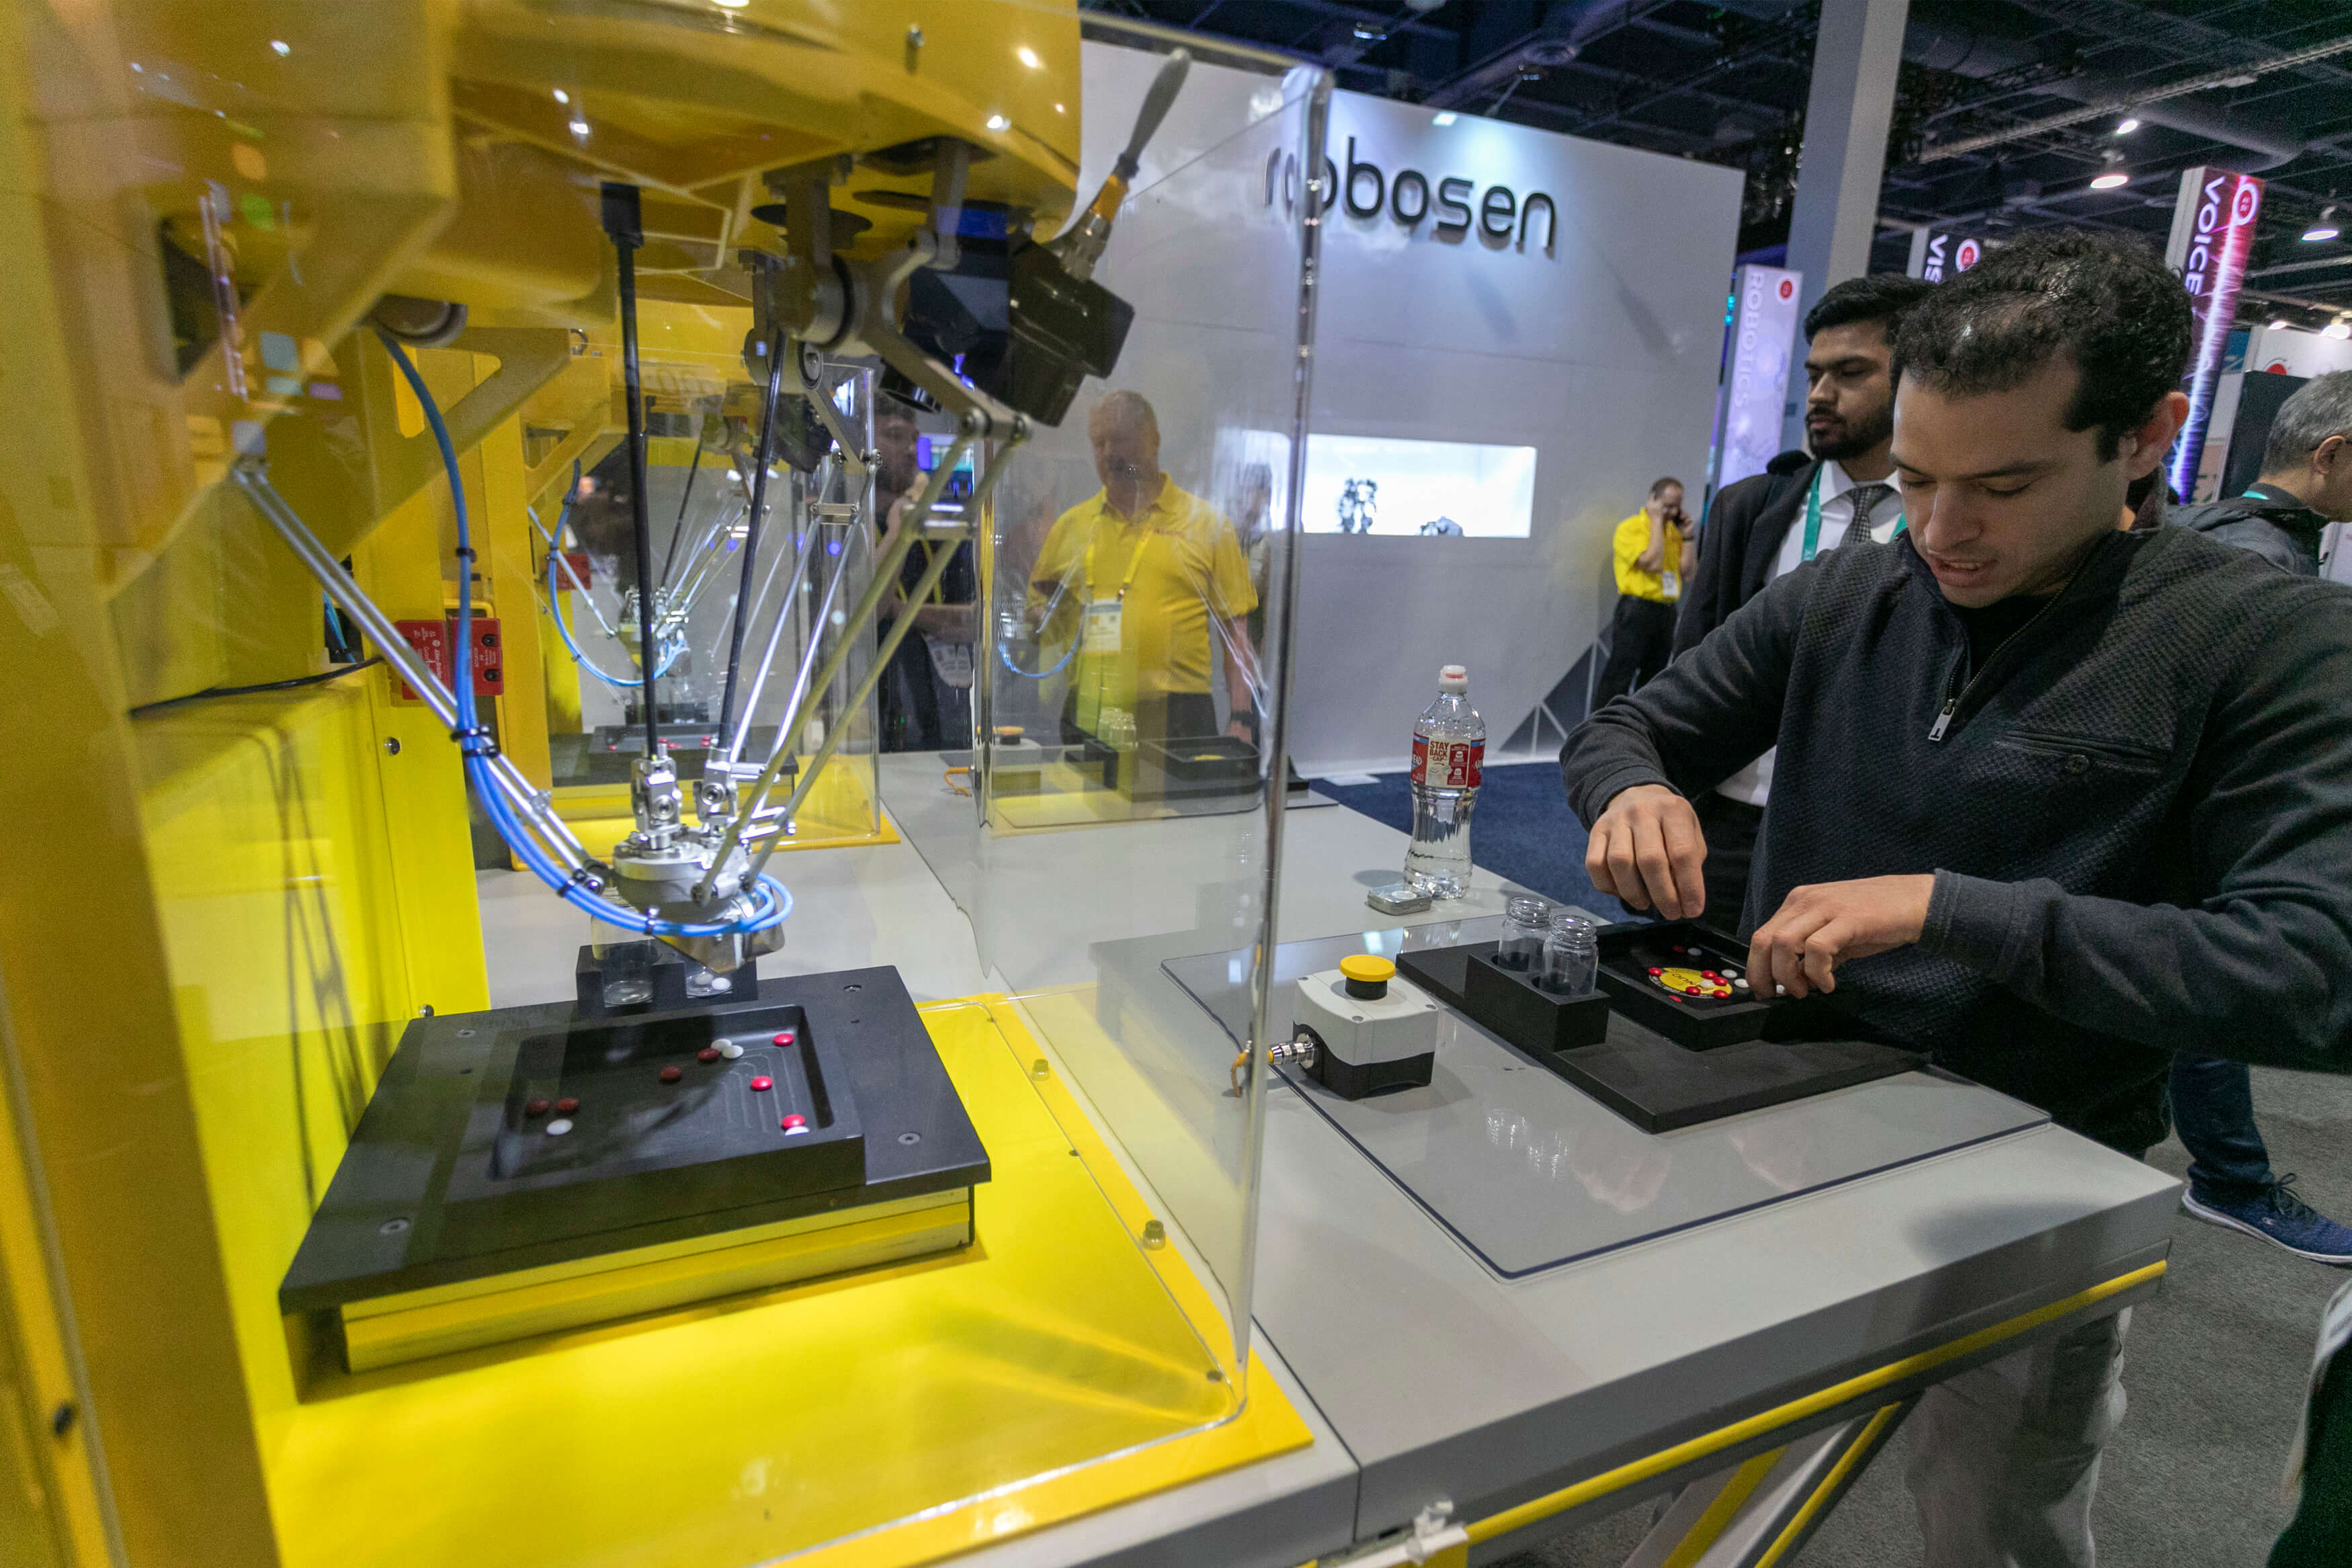 A man races against the speed of a FANUC robot sorting colored objects at the 2020 Consumer Electronics Show